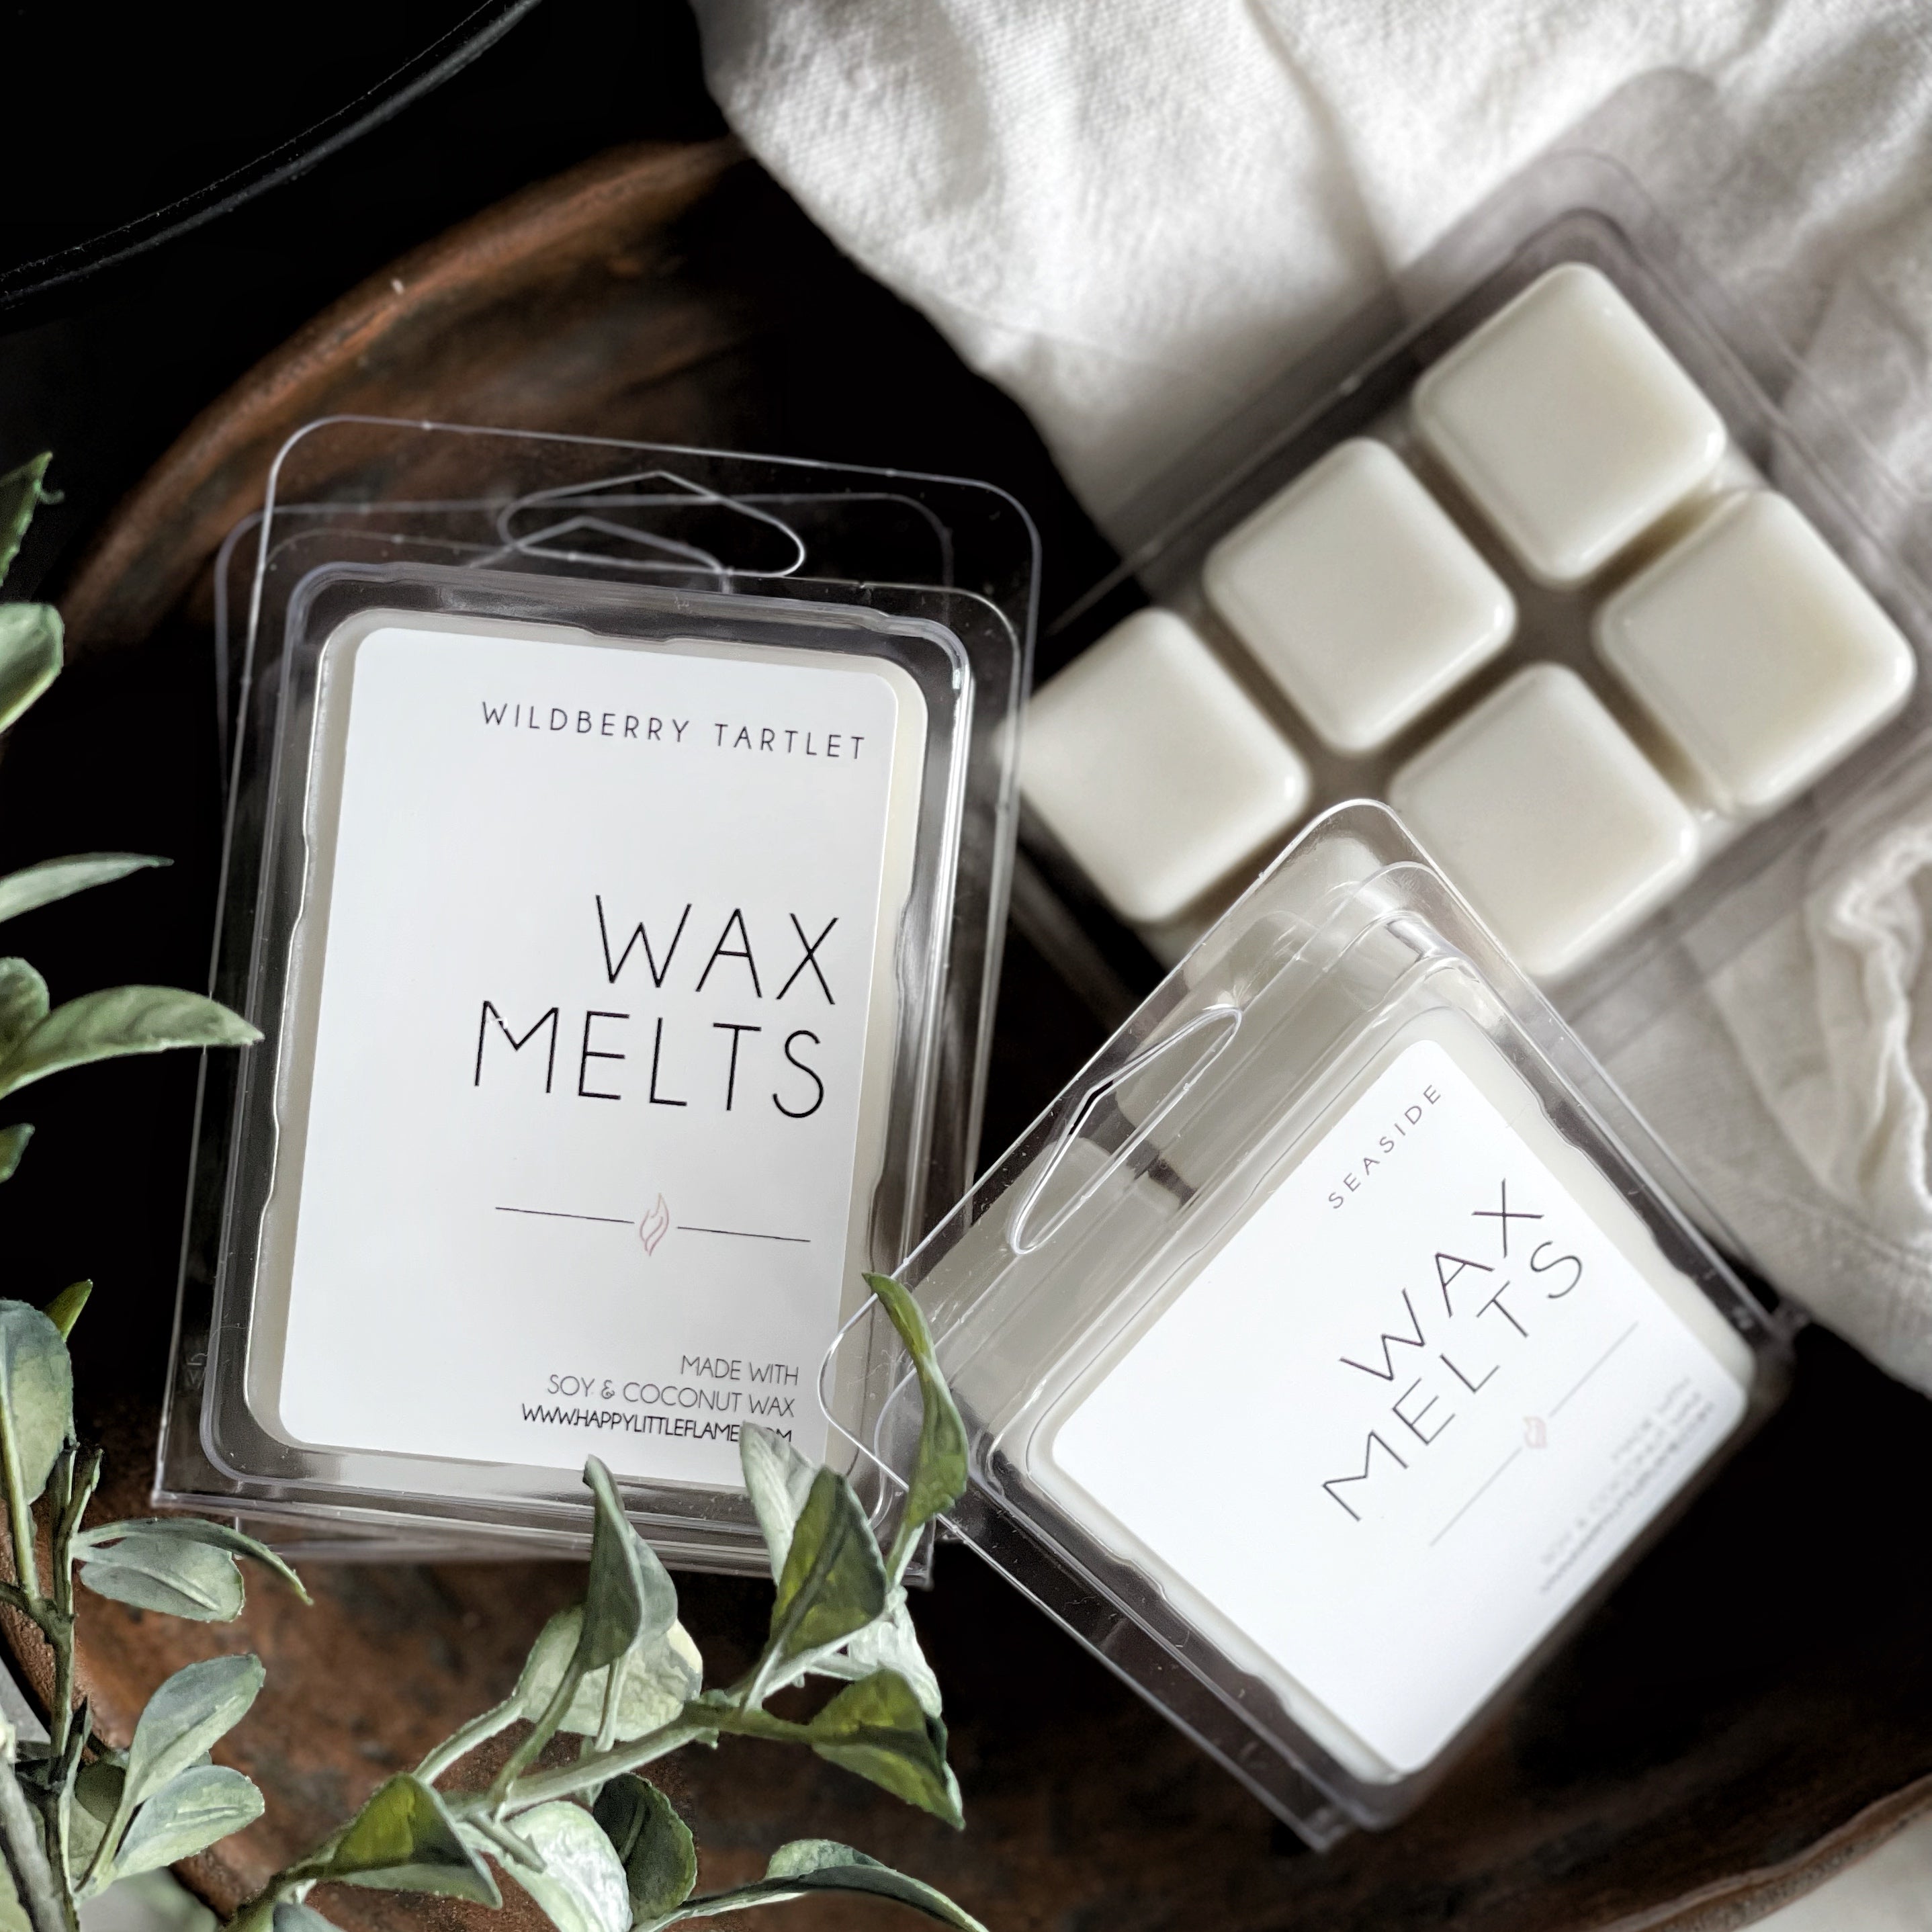  Hotel Lobby Wax Melts -2 Pack- Lightweight Scented Non